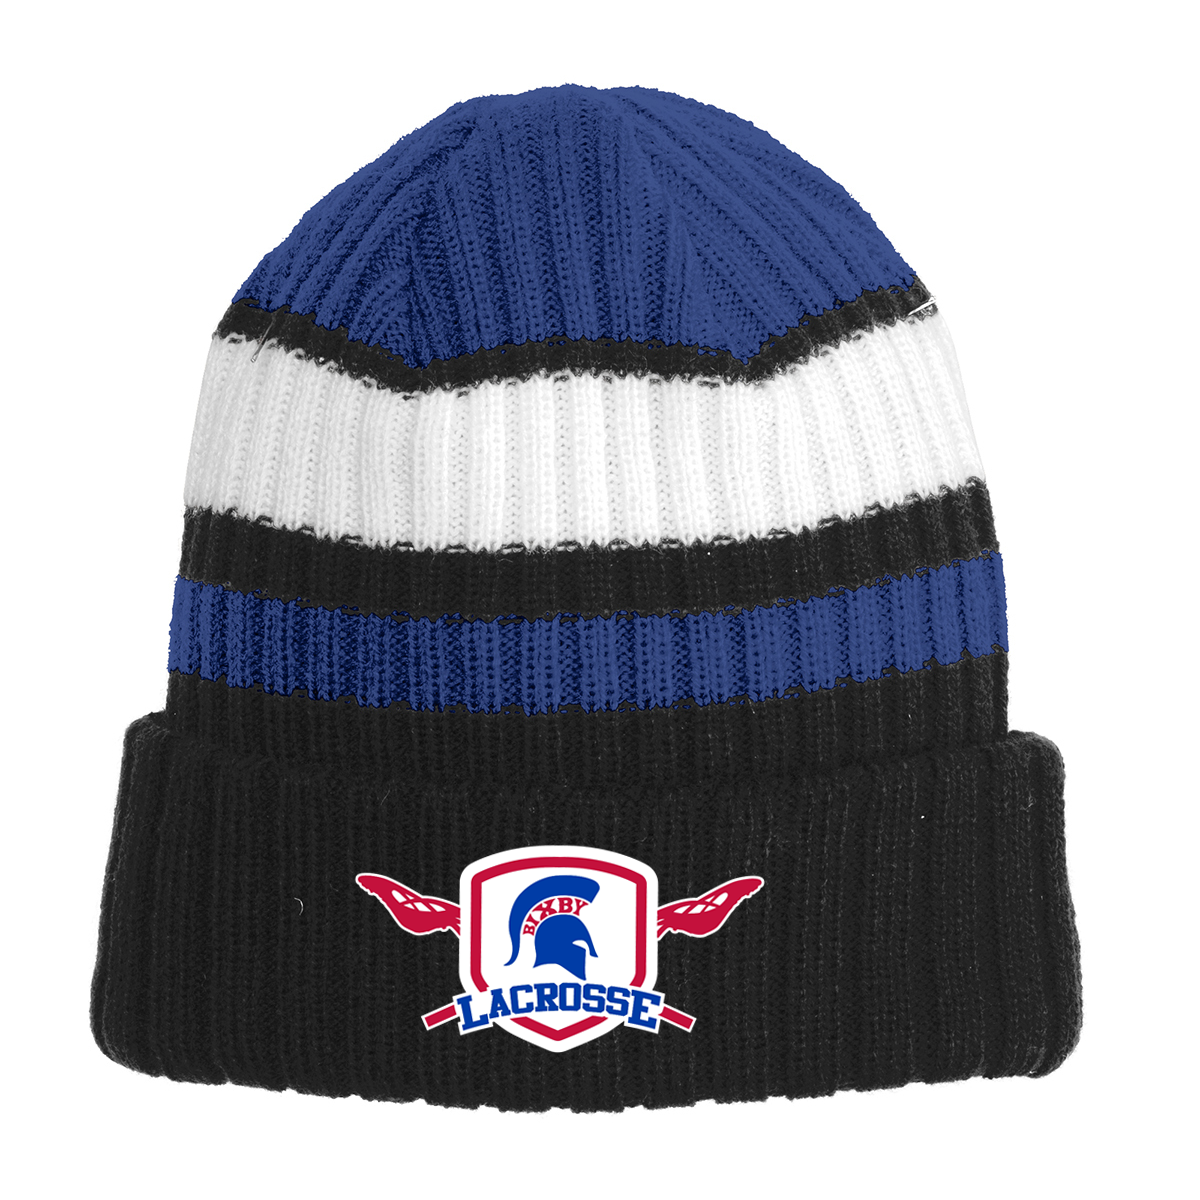 Bixby Lacrosse Ribbed Tailgate Beanie